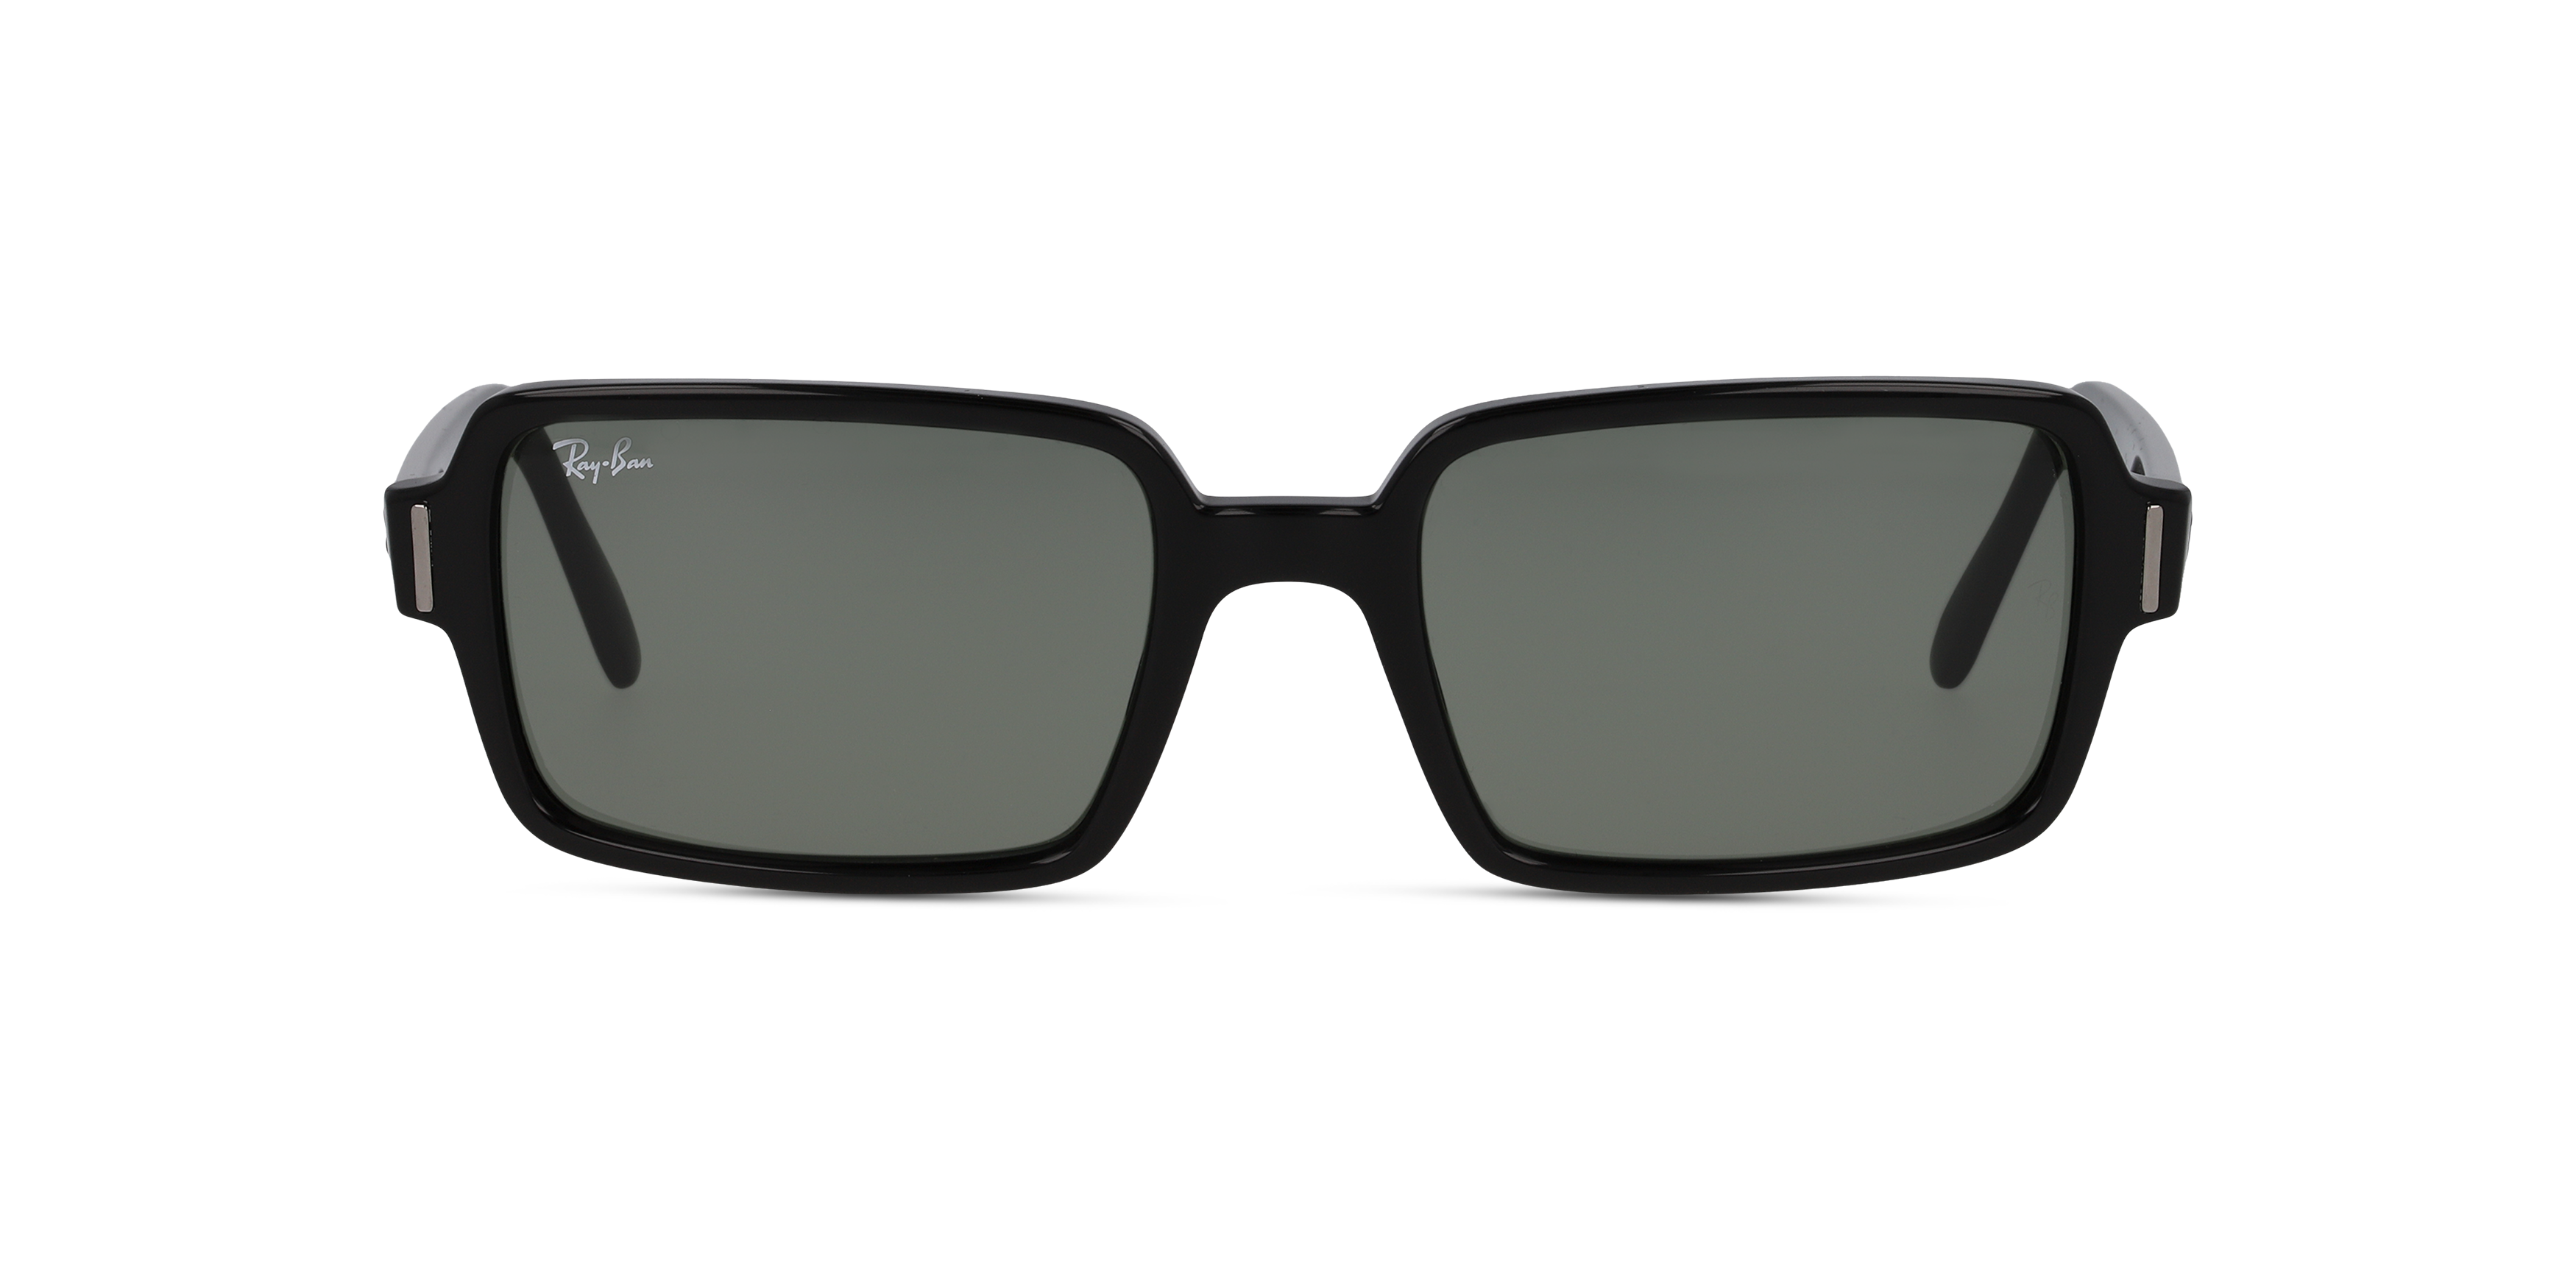 [products.image.front] Ray-Ban 0RB2189 901/31